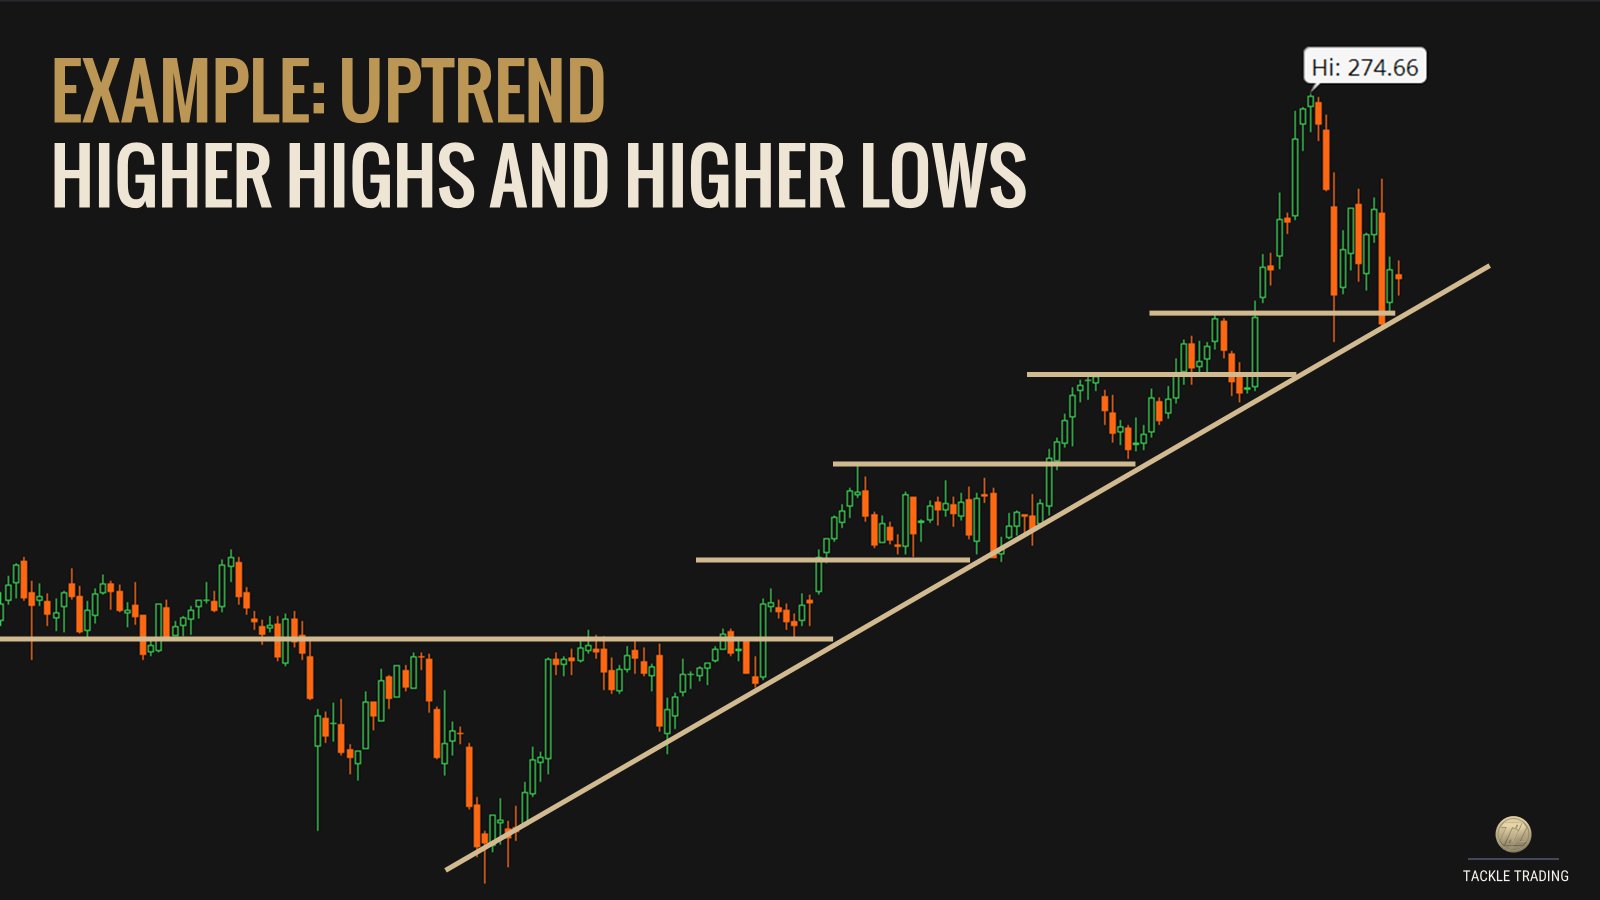 Chart of the Day: Example of an uptrend with higher highs and higher lows